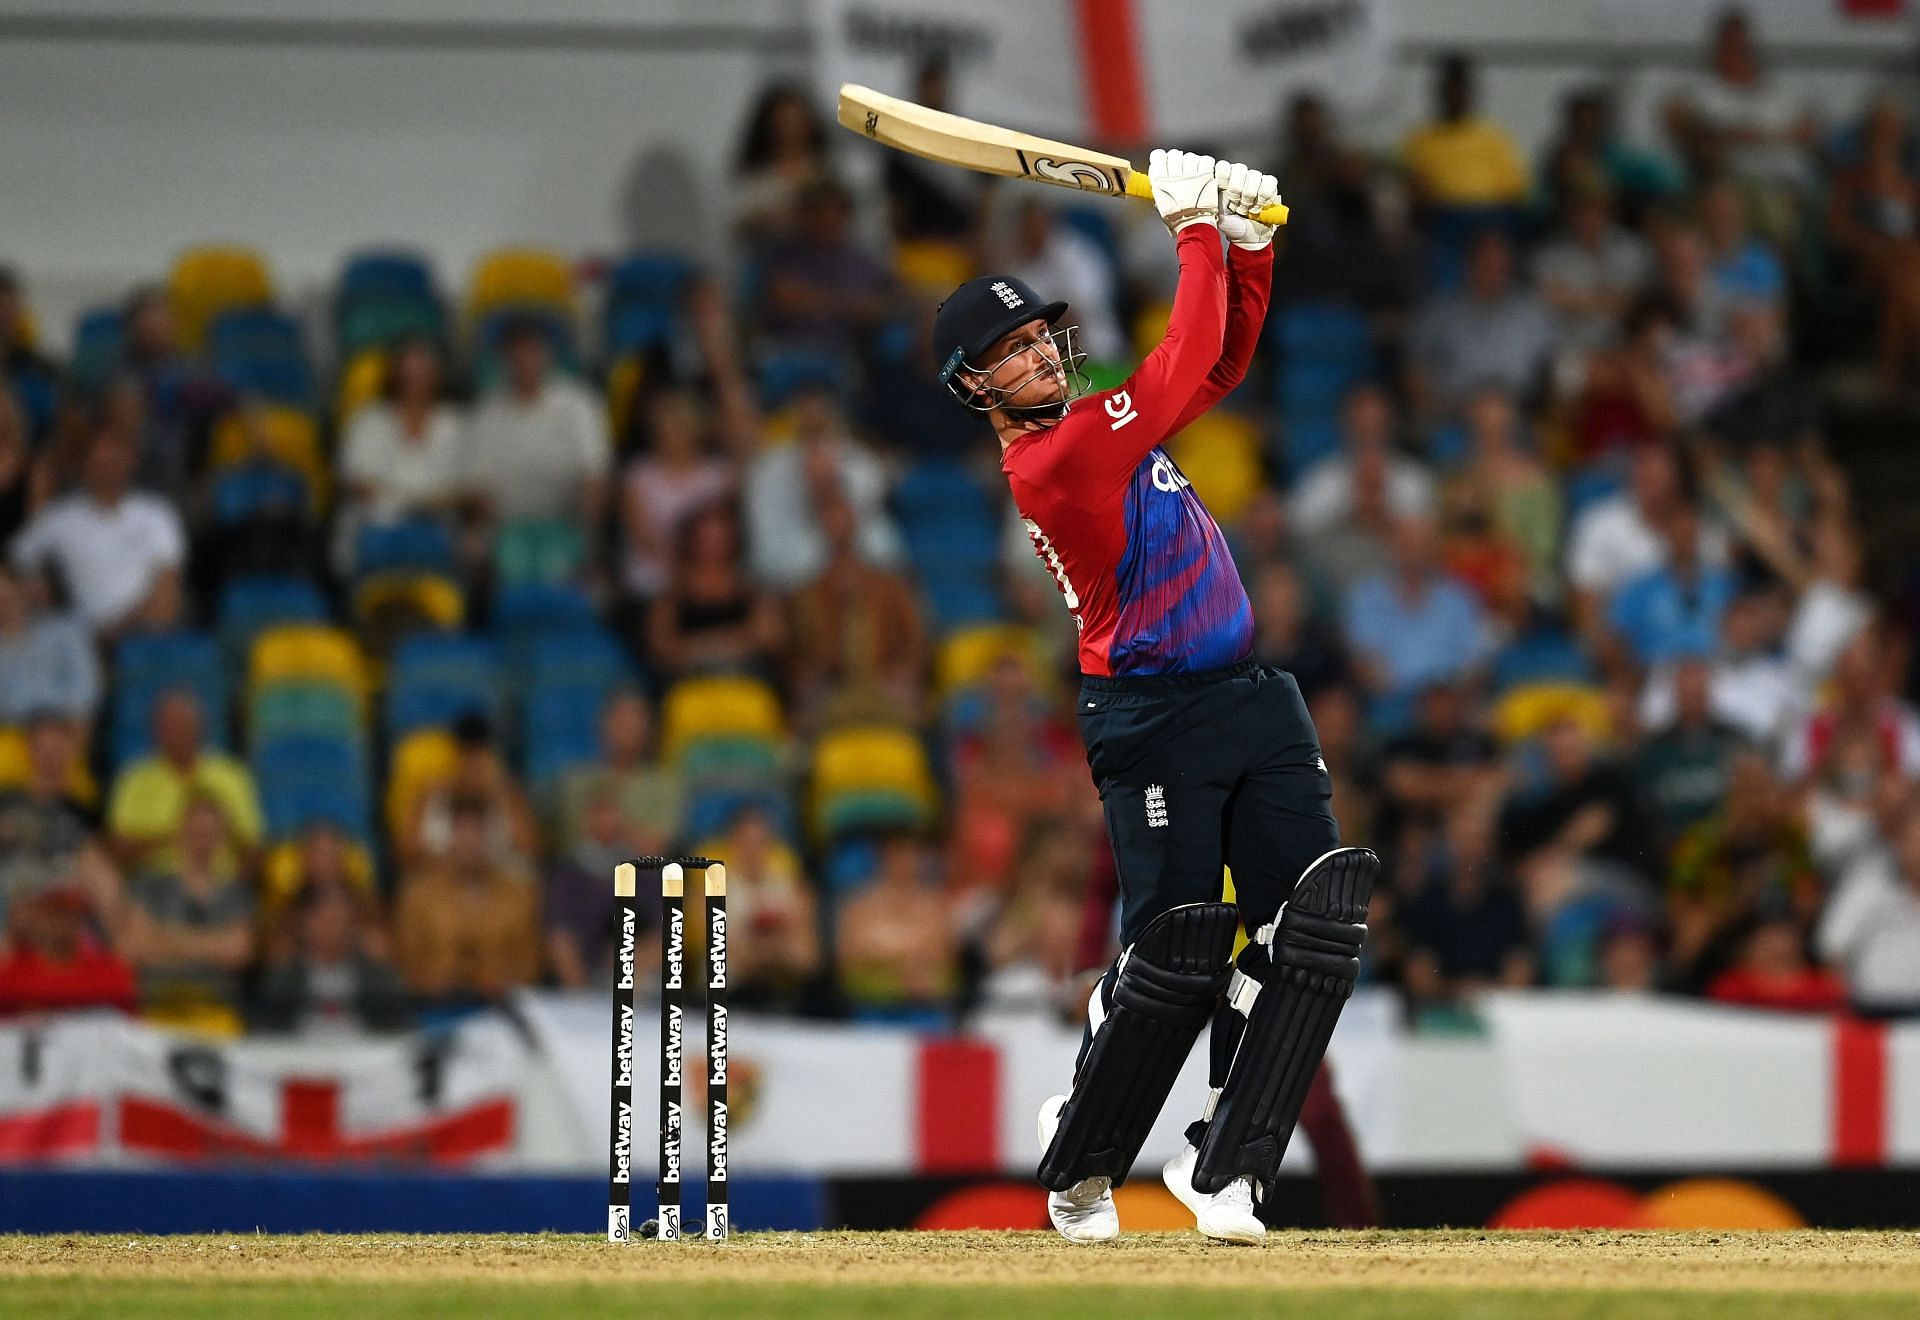 Jason Roy has been found guilty of bringing the game into disrepute